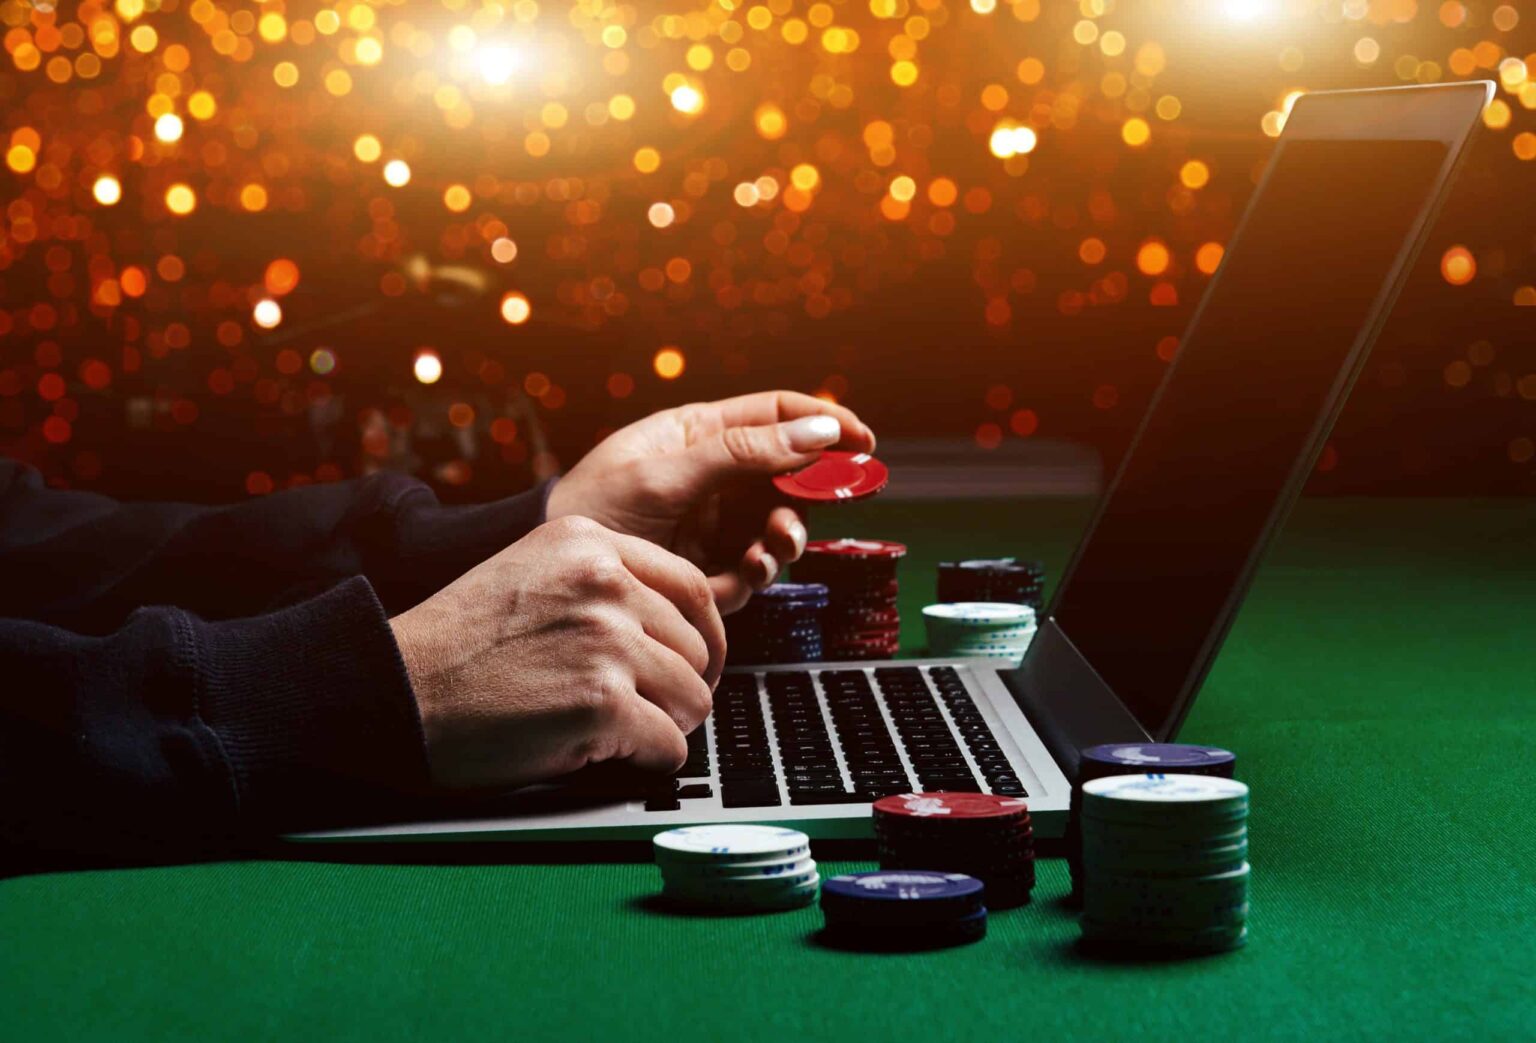 most trusted online casinos for usa players